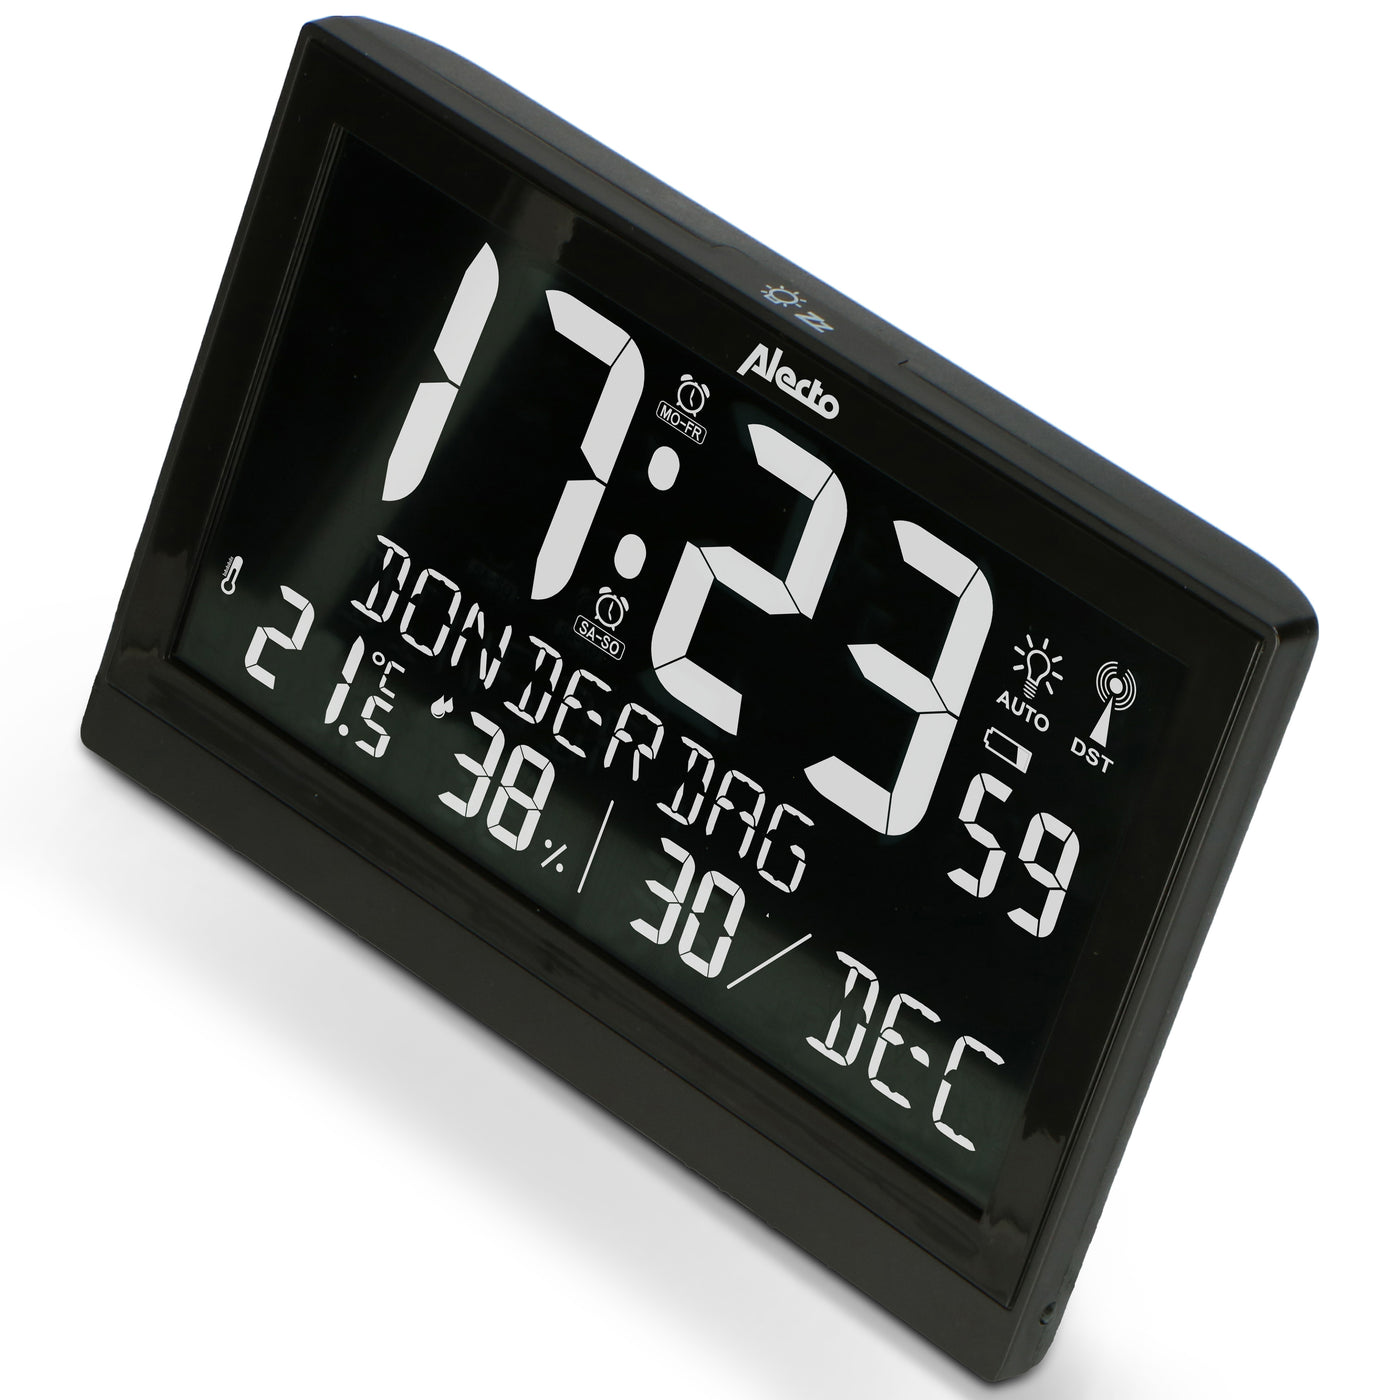 Alecto AK-70 - Large digital clock with thermometer, hygrometer